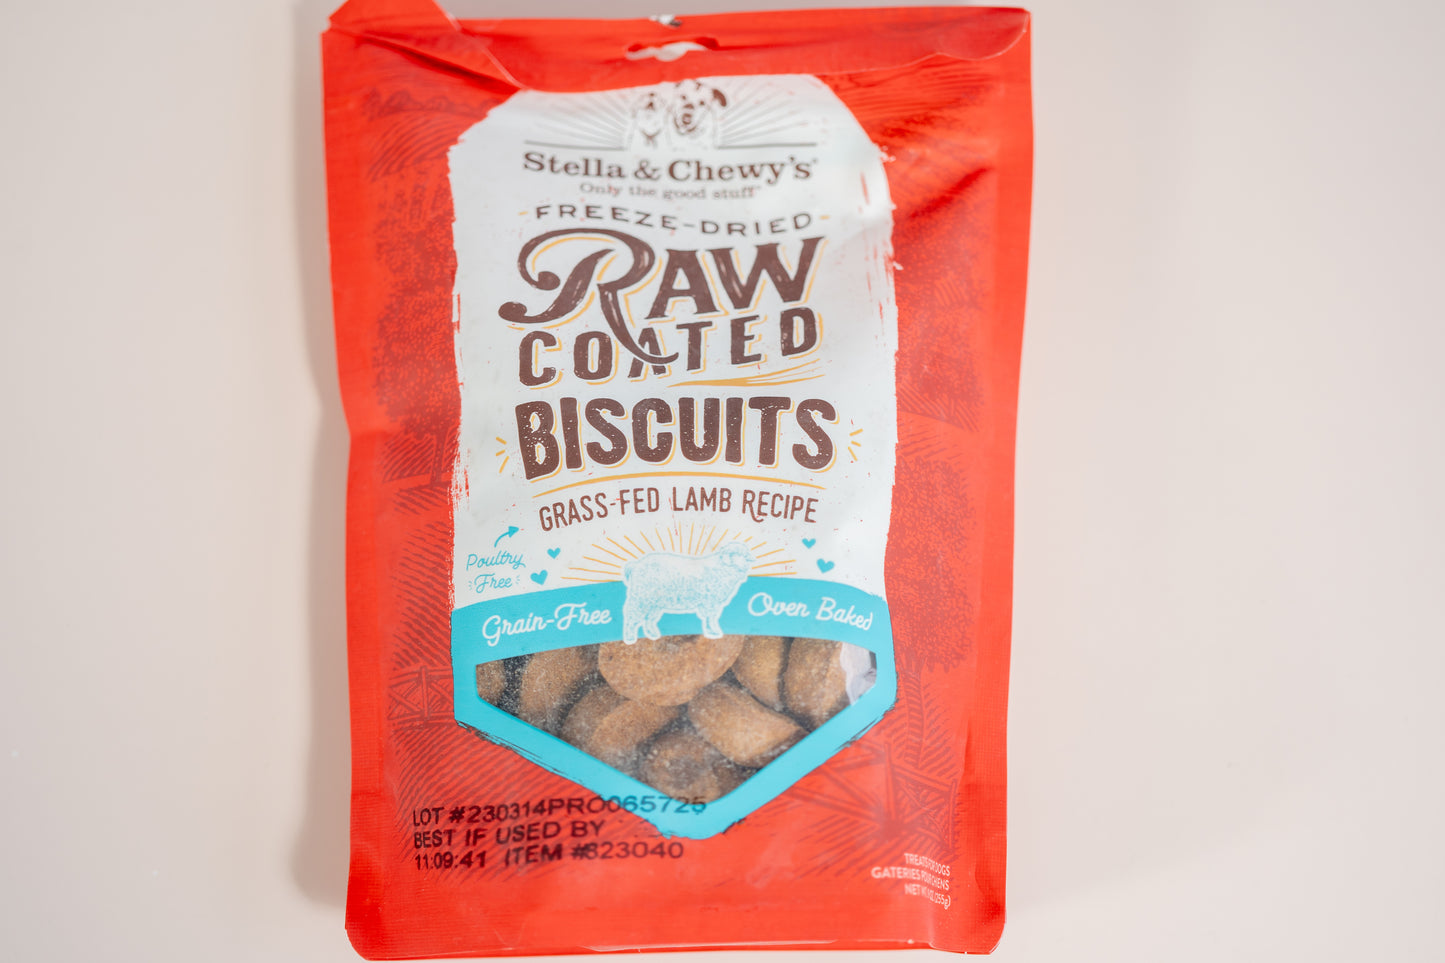 Freeze-dried raw coated biscuits for dogs from grass-fed lamb recipe.